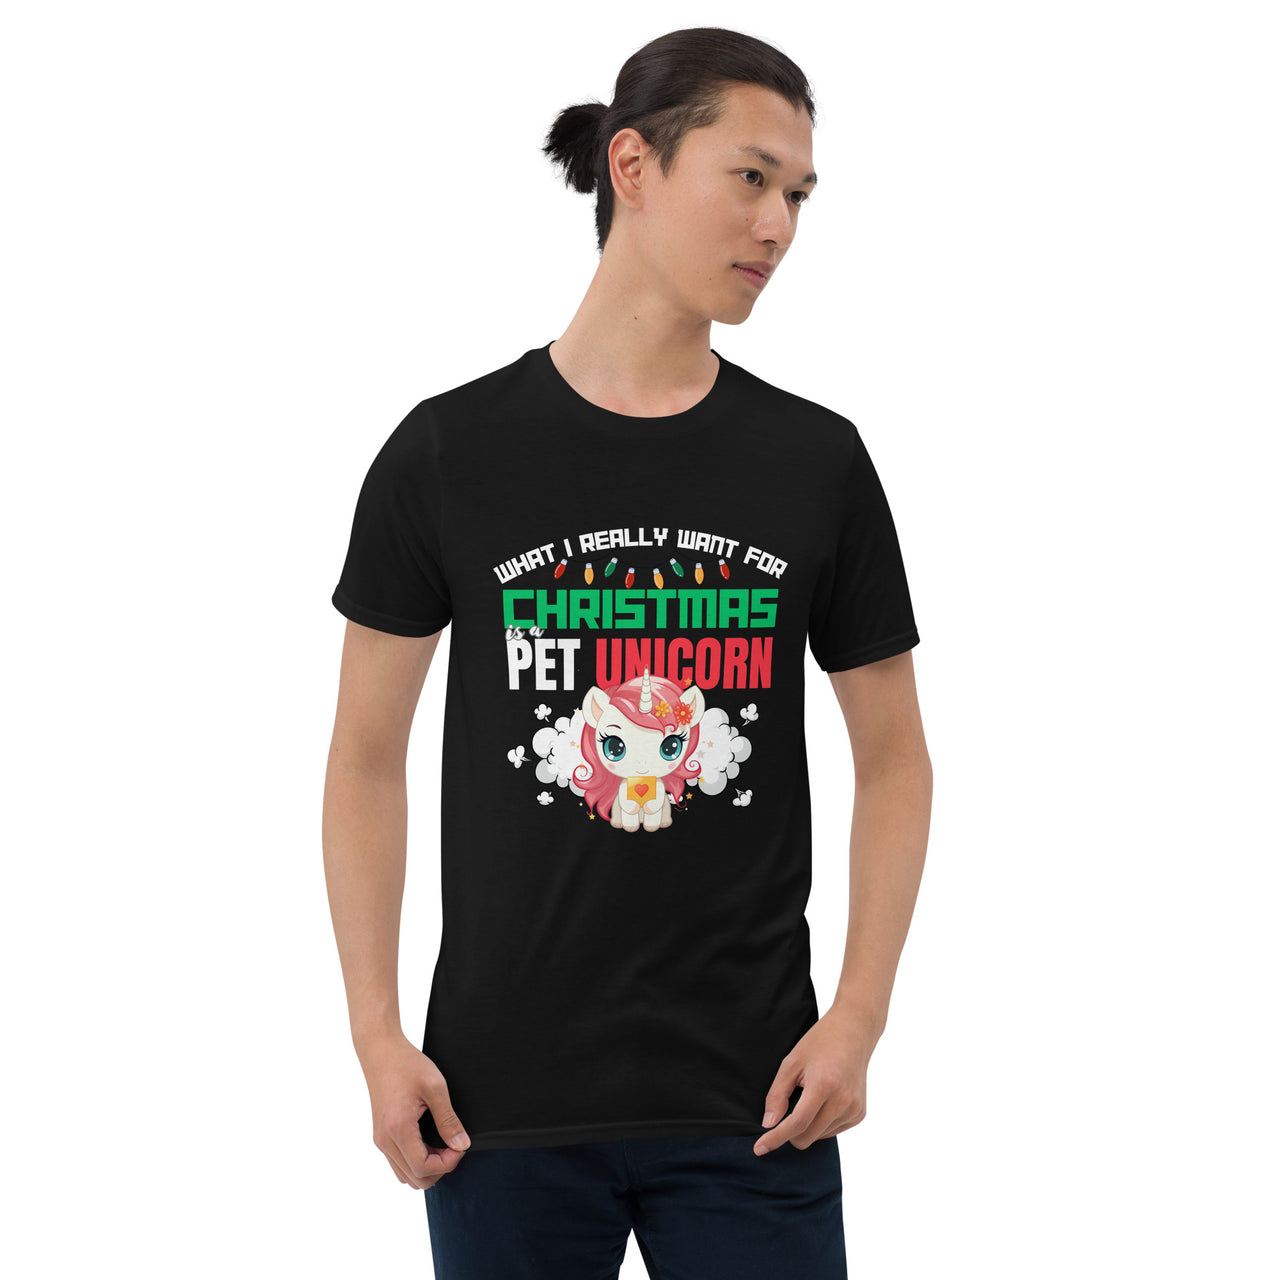 A Pet Unicorn for Magical Holiday Humor T-Shirt